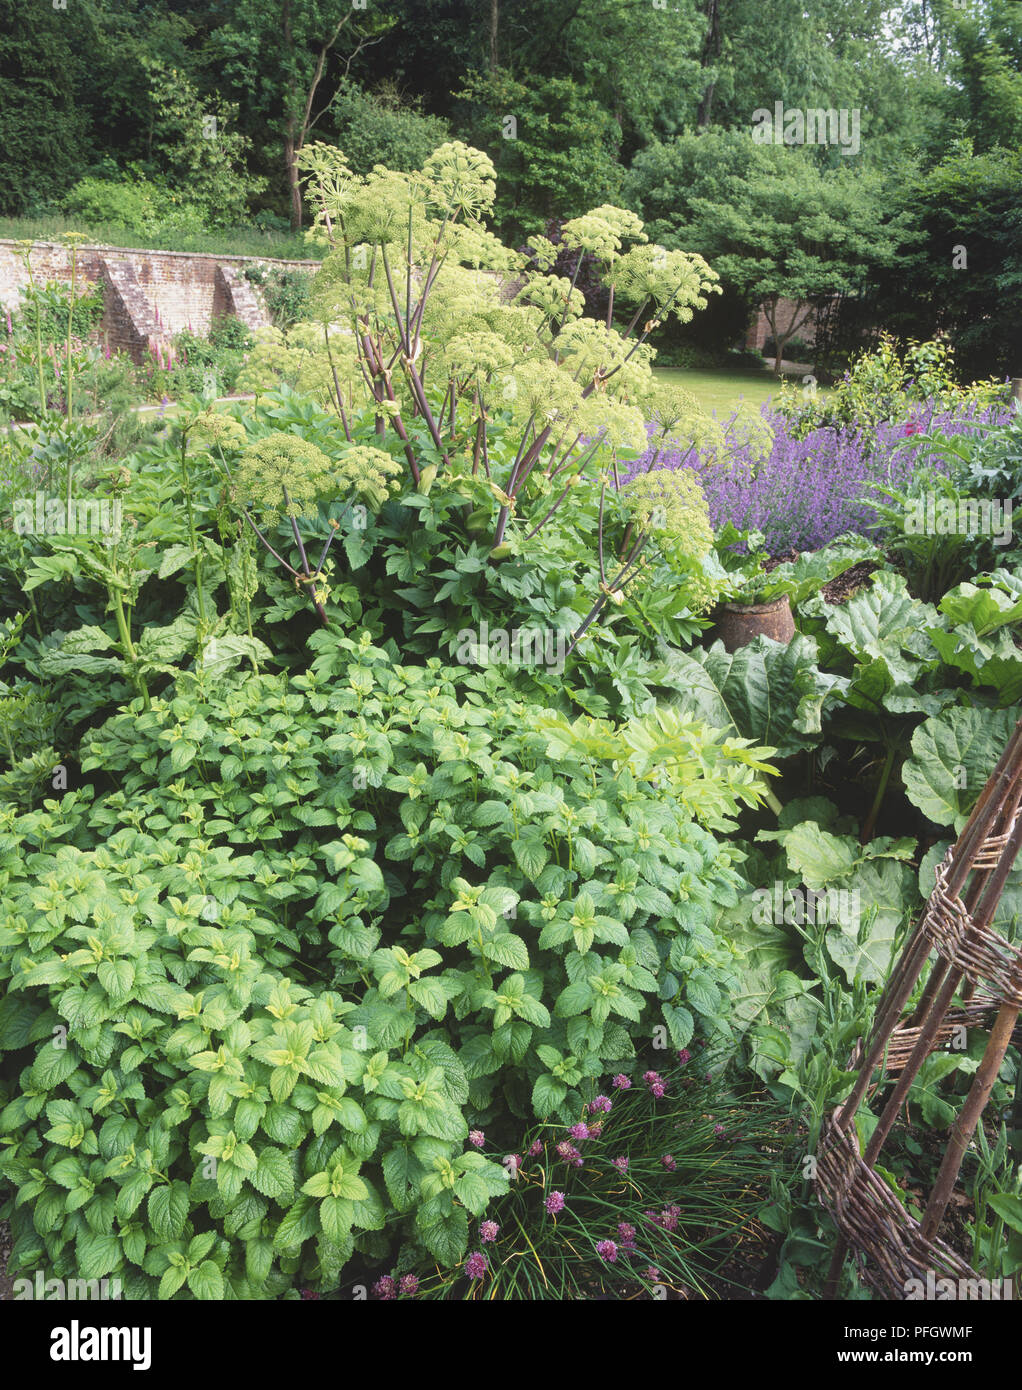 Vegetable and herb garden in summer, including pink flowers of Chives at bottom centre, tall pale green flower heads of Angelica at top, large leaves of Rhubarb at centre right Stock Photo